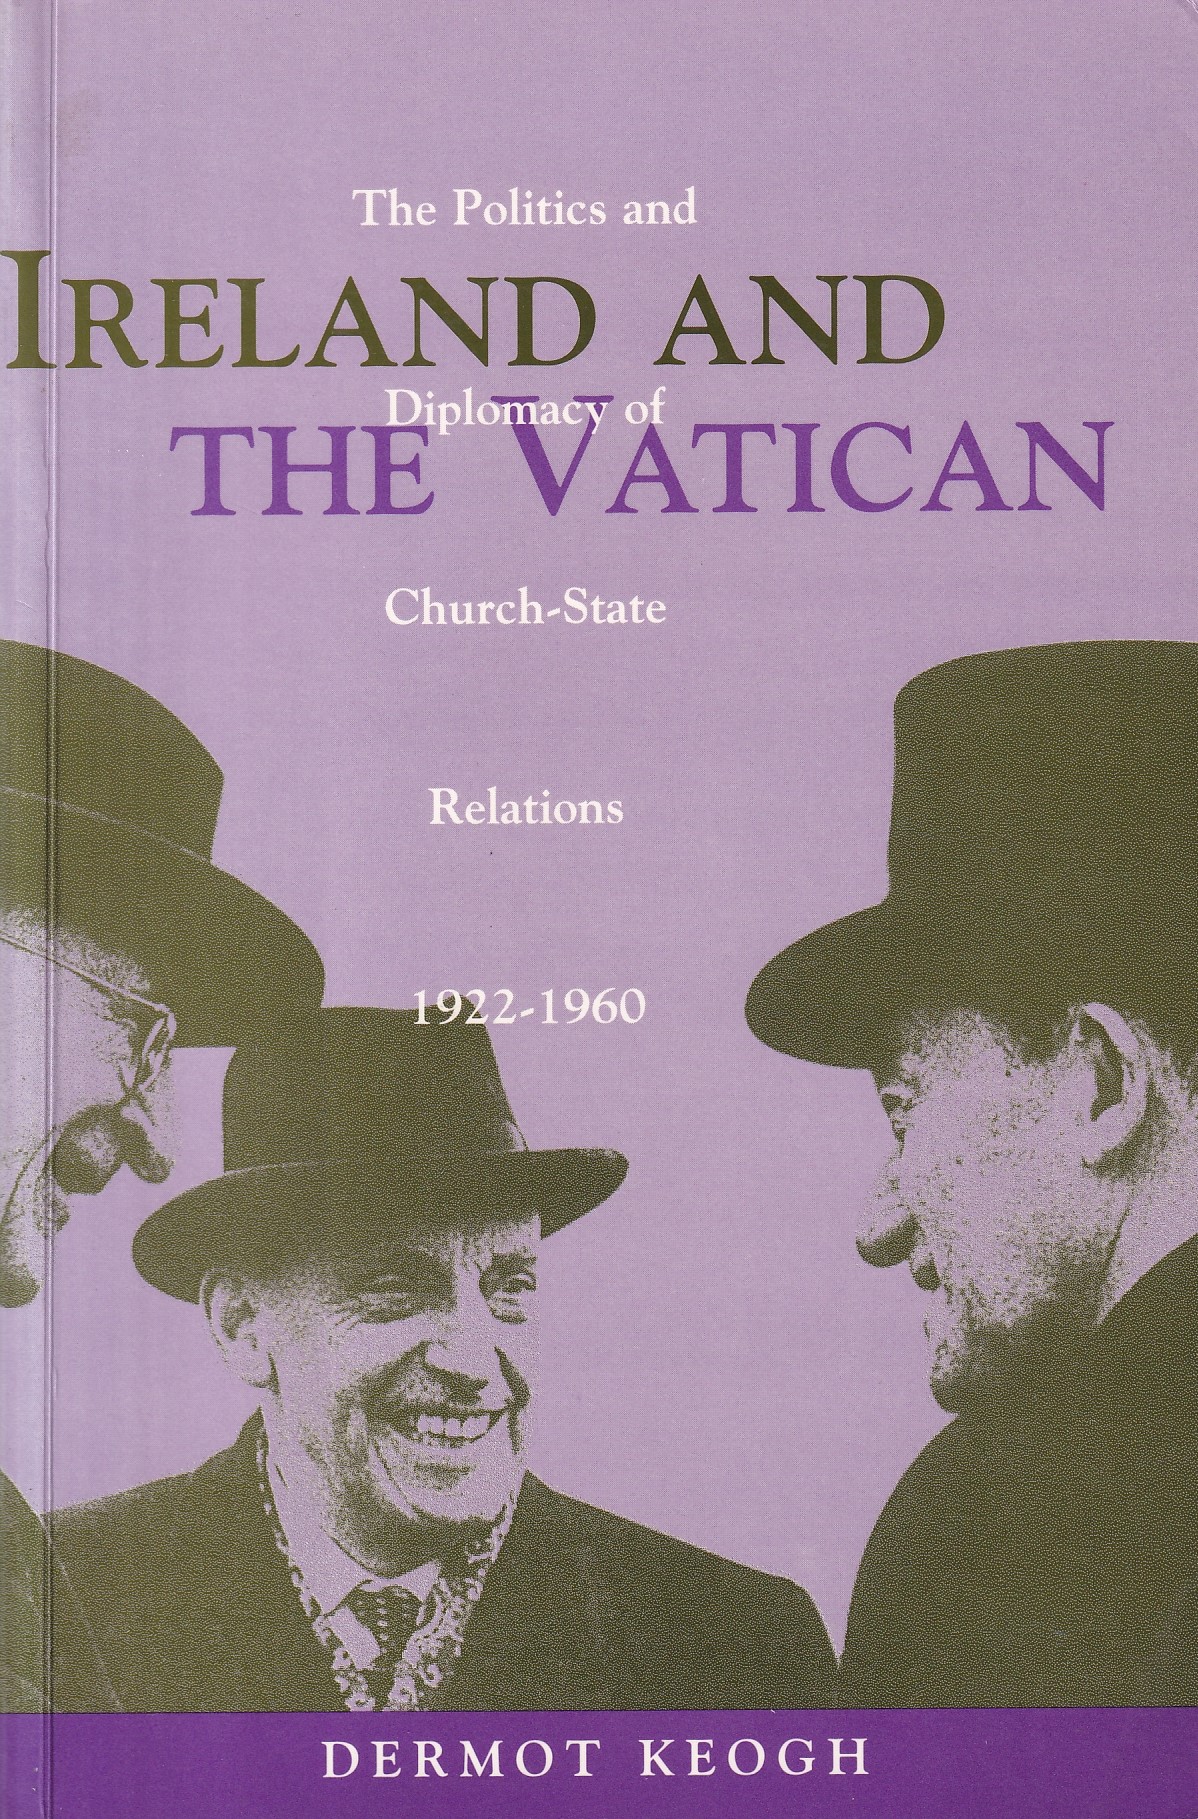 Ireland and the Vatican: The Politics and Diplomacy of Church-State Relations, 1922-1960 | Dermot Keogh | Charlie Byrne's